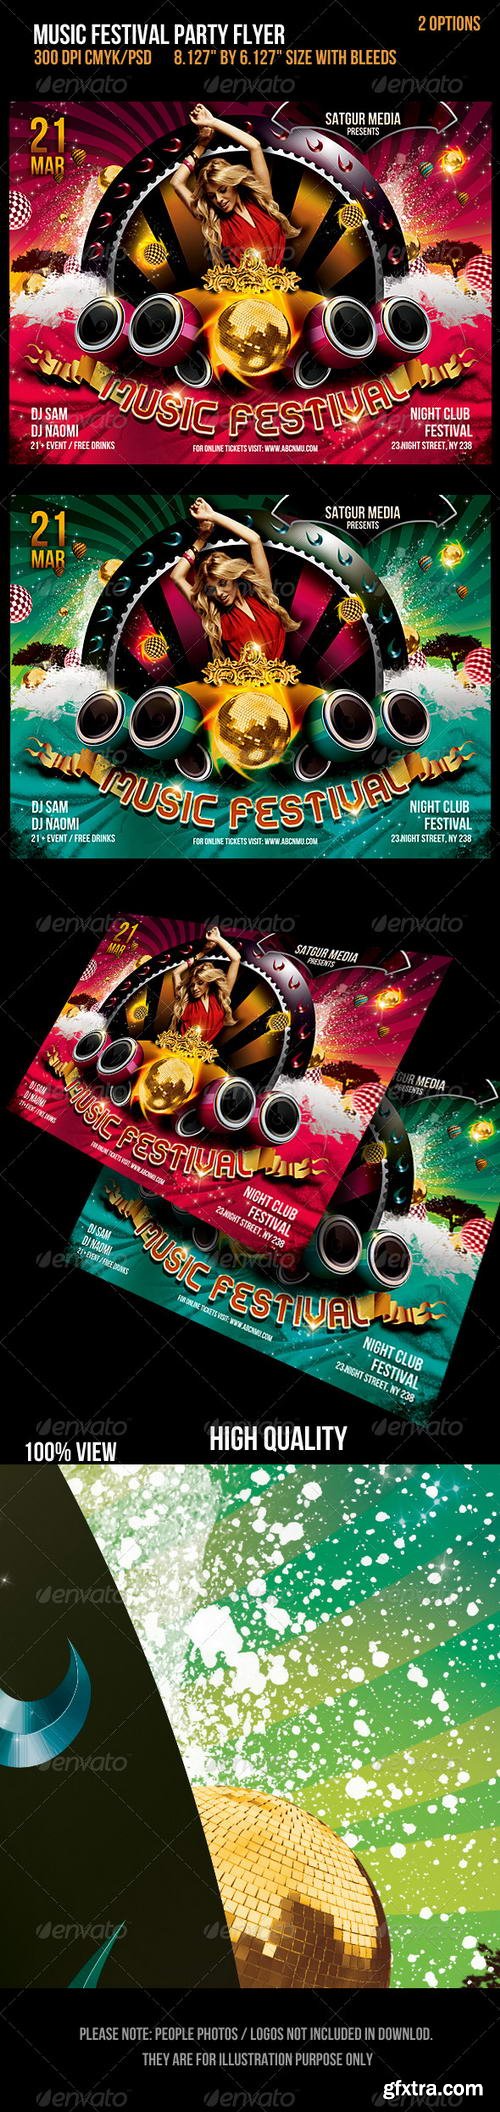 GraphicRiver - Music Festival Dance Party Flyer